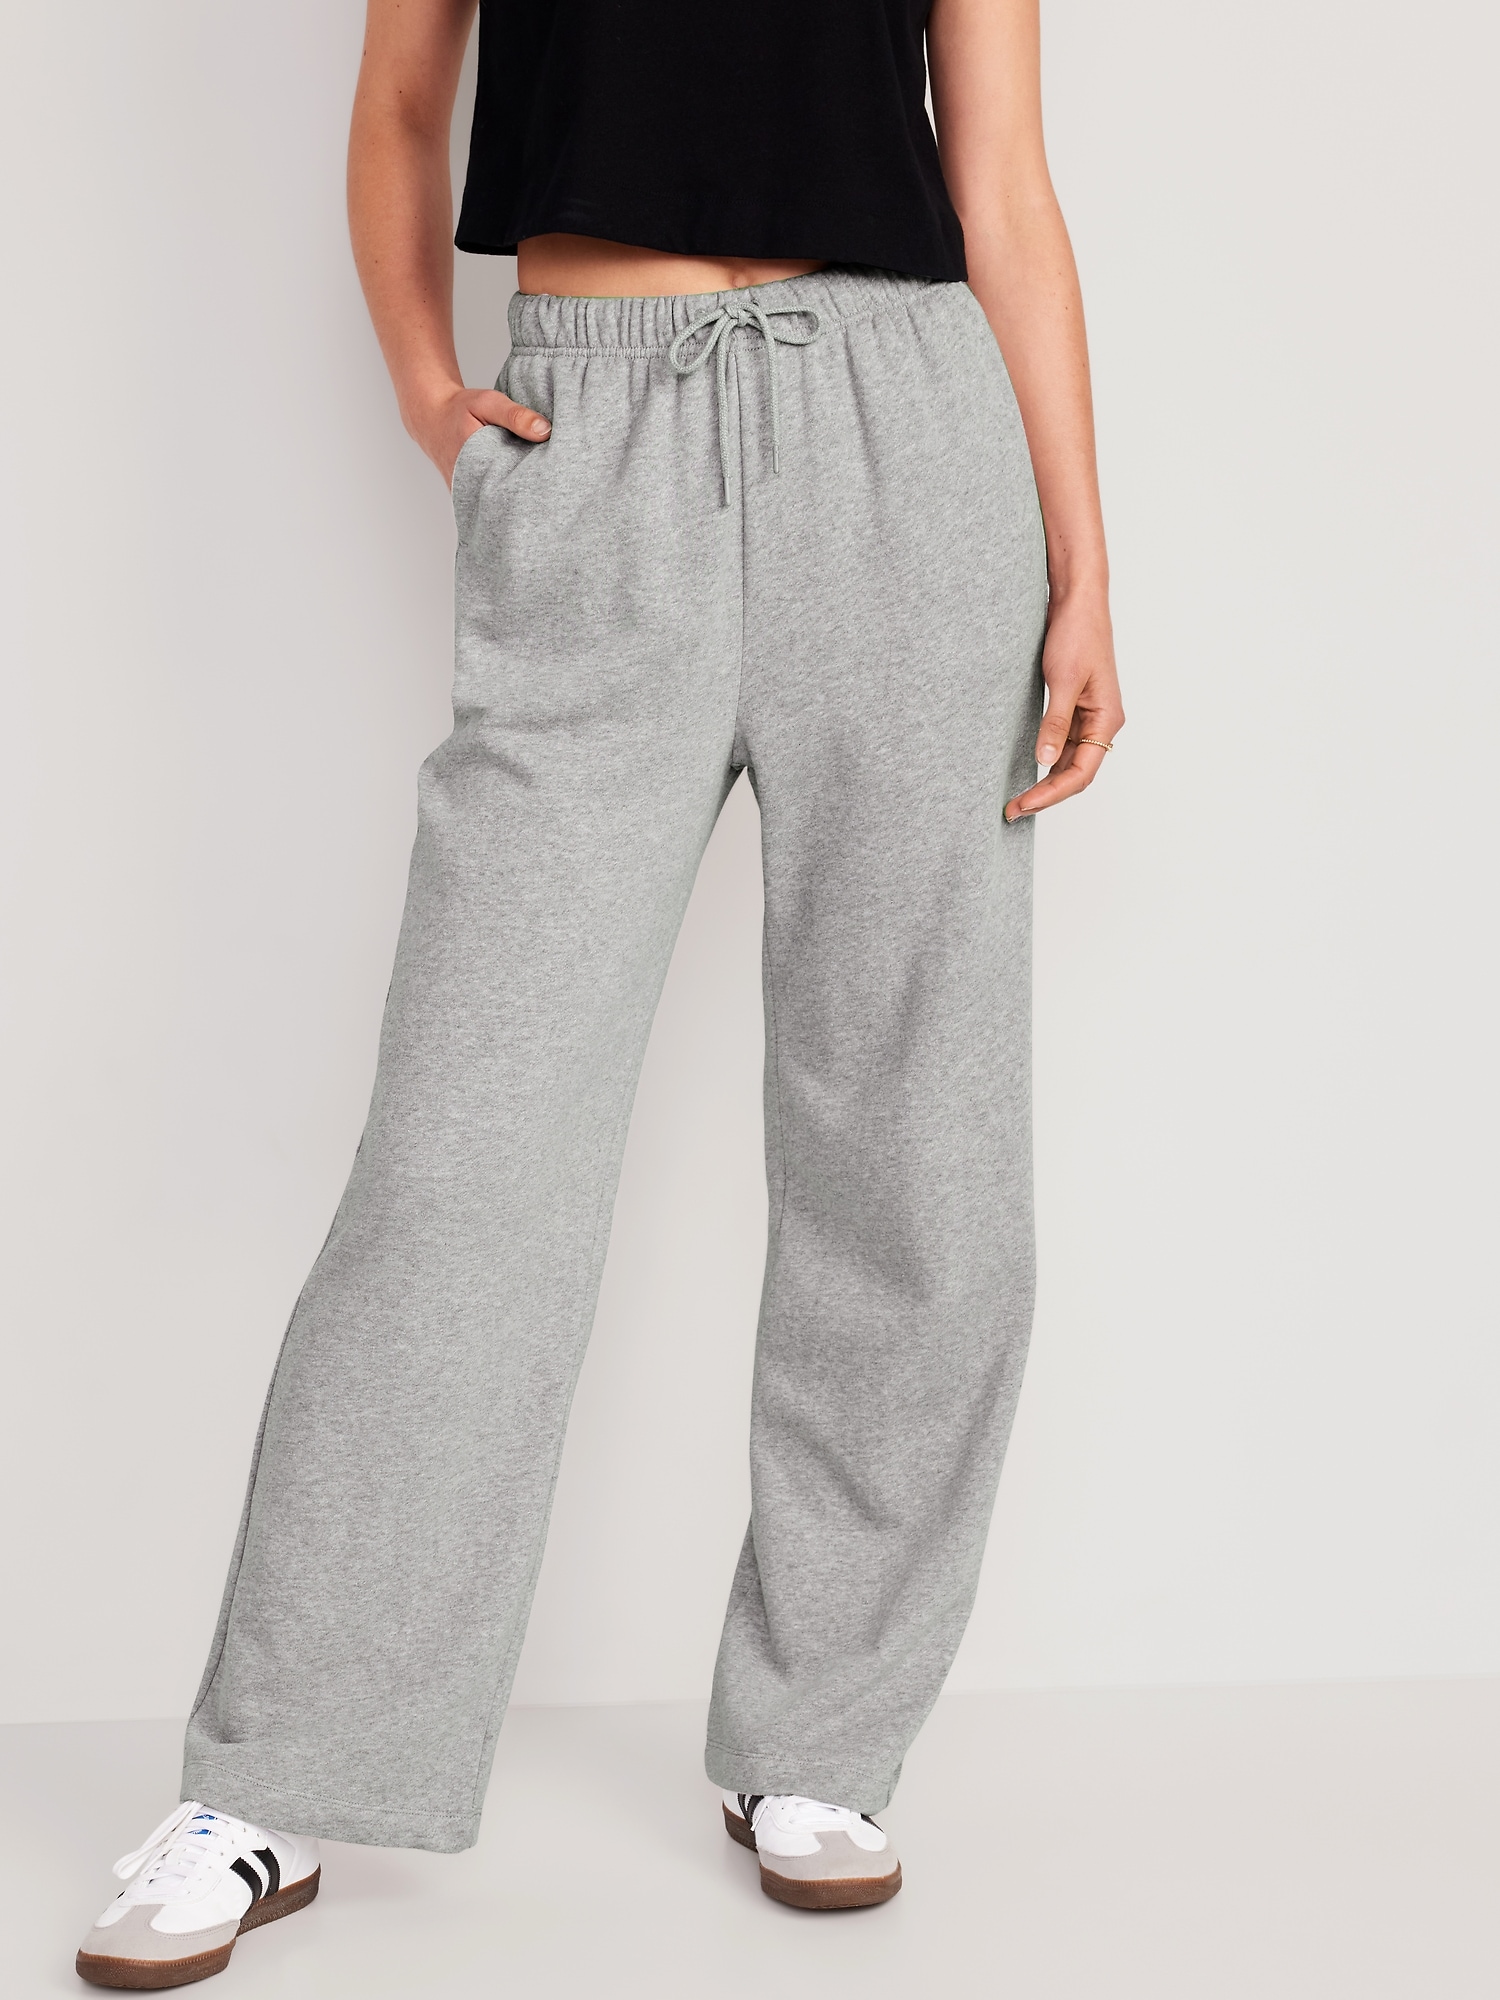 Sweatpants With Wide Legs